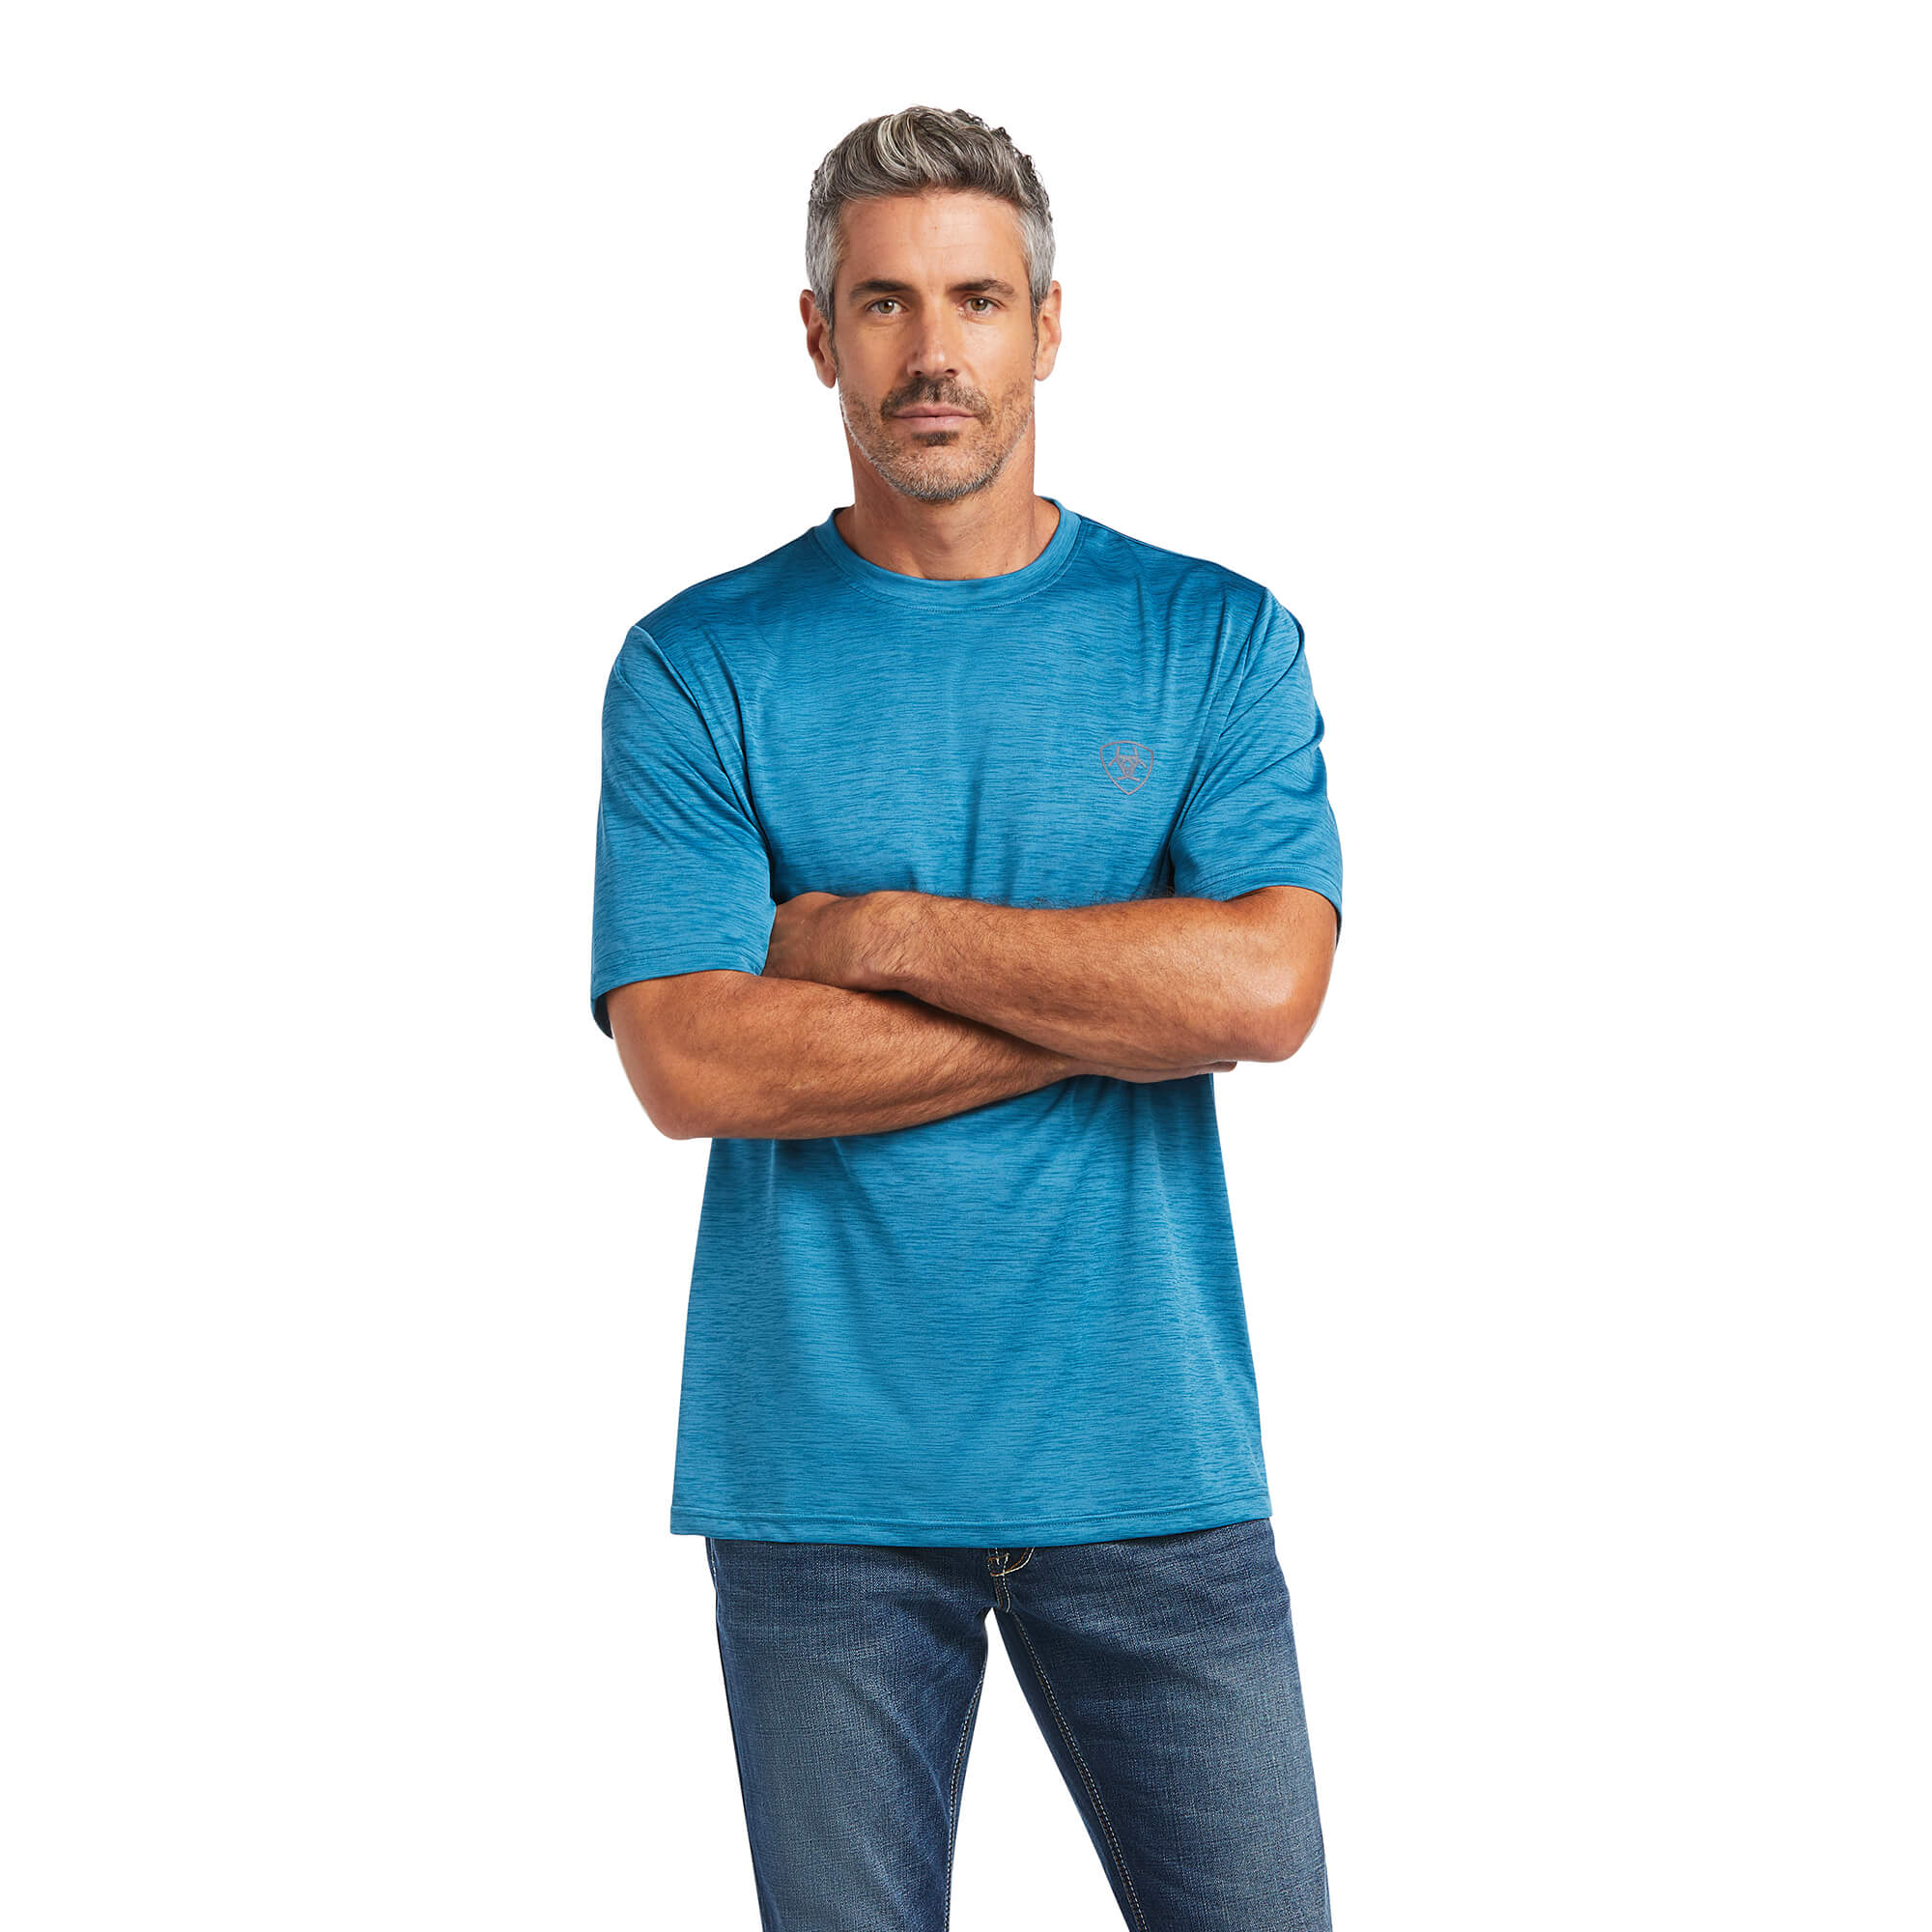 Ariat Men's Charger Shield Tee